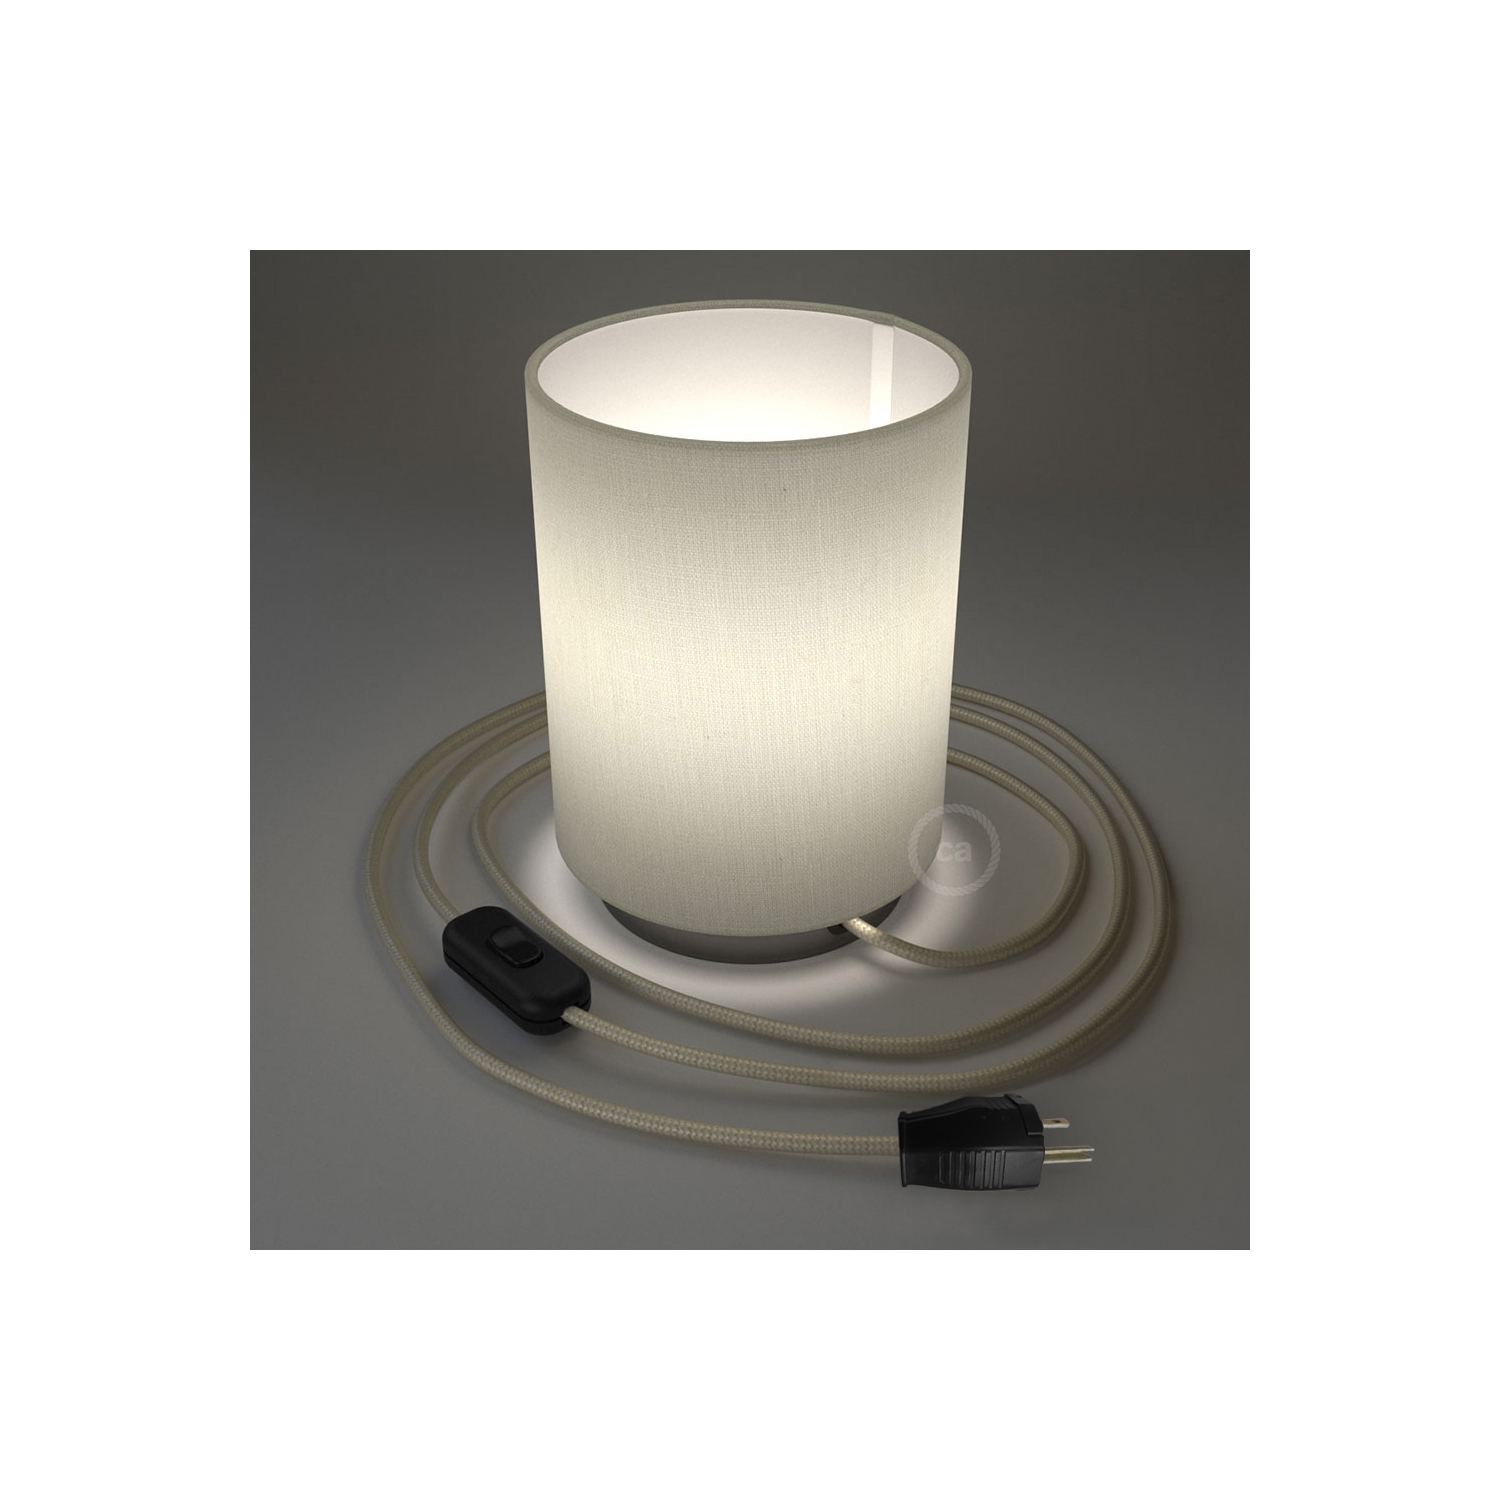 Posaluce with White Raw Cotton Cylinder lampshade, black pearl metal, with textile cable, switch and plug